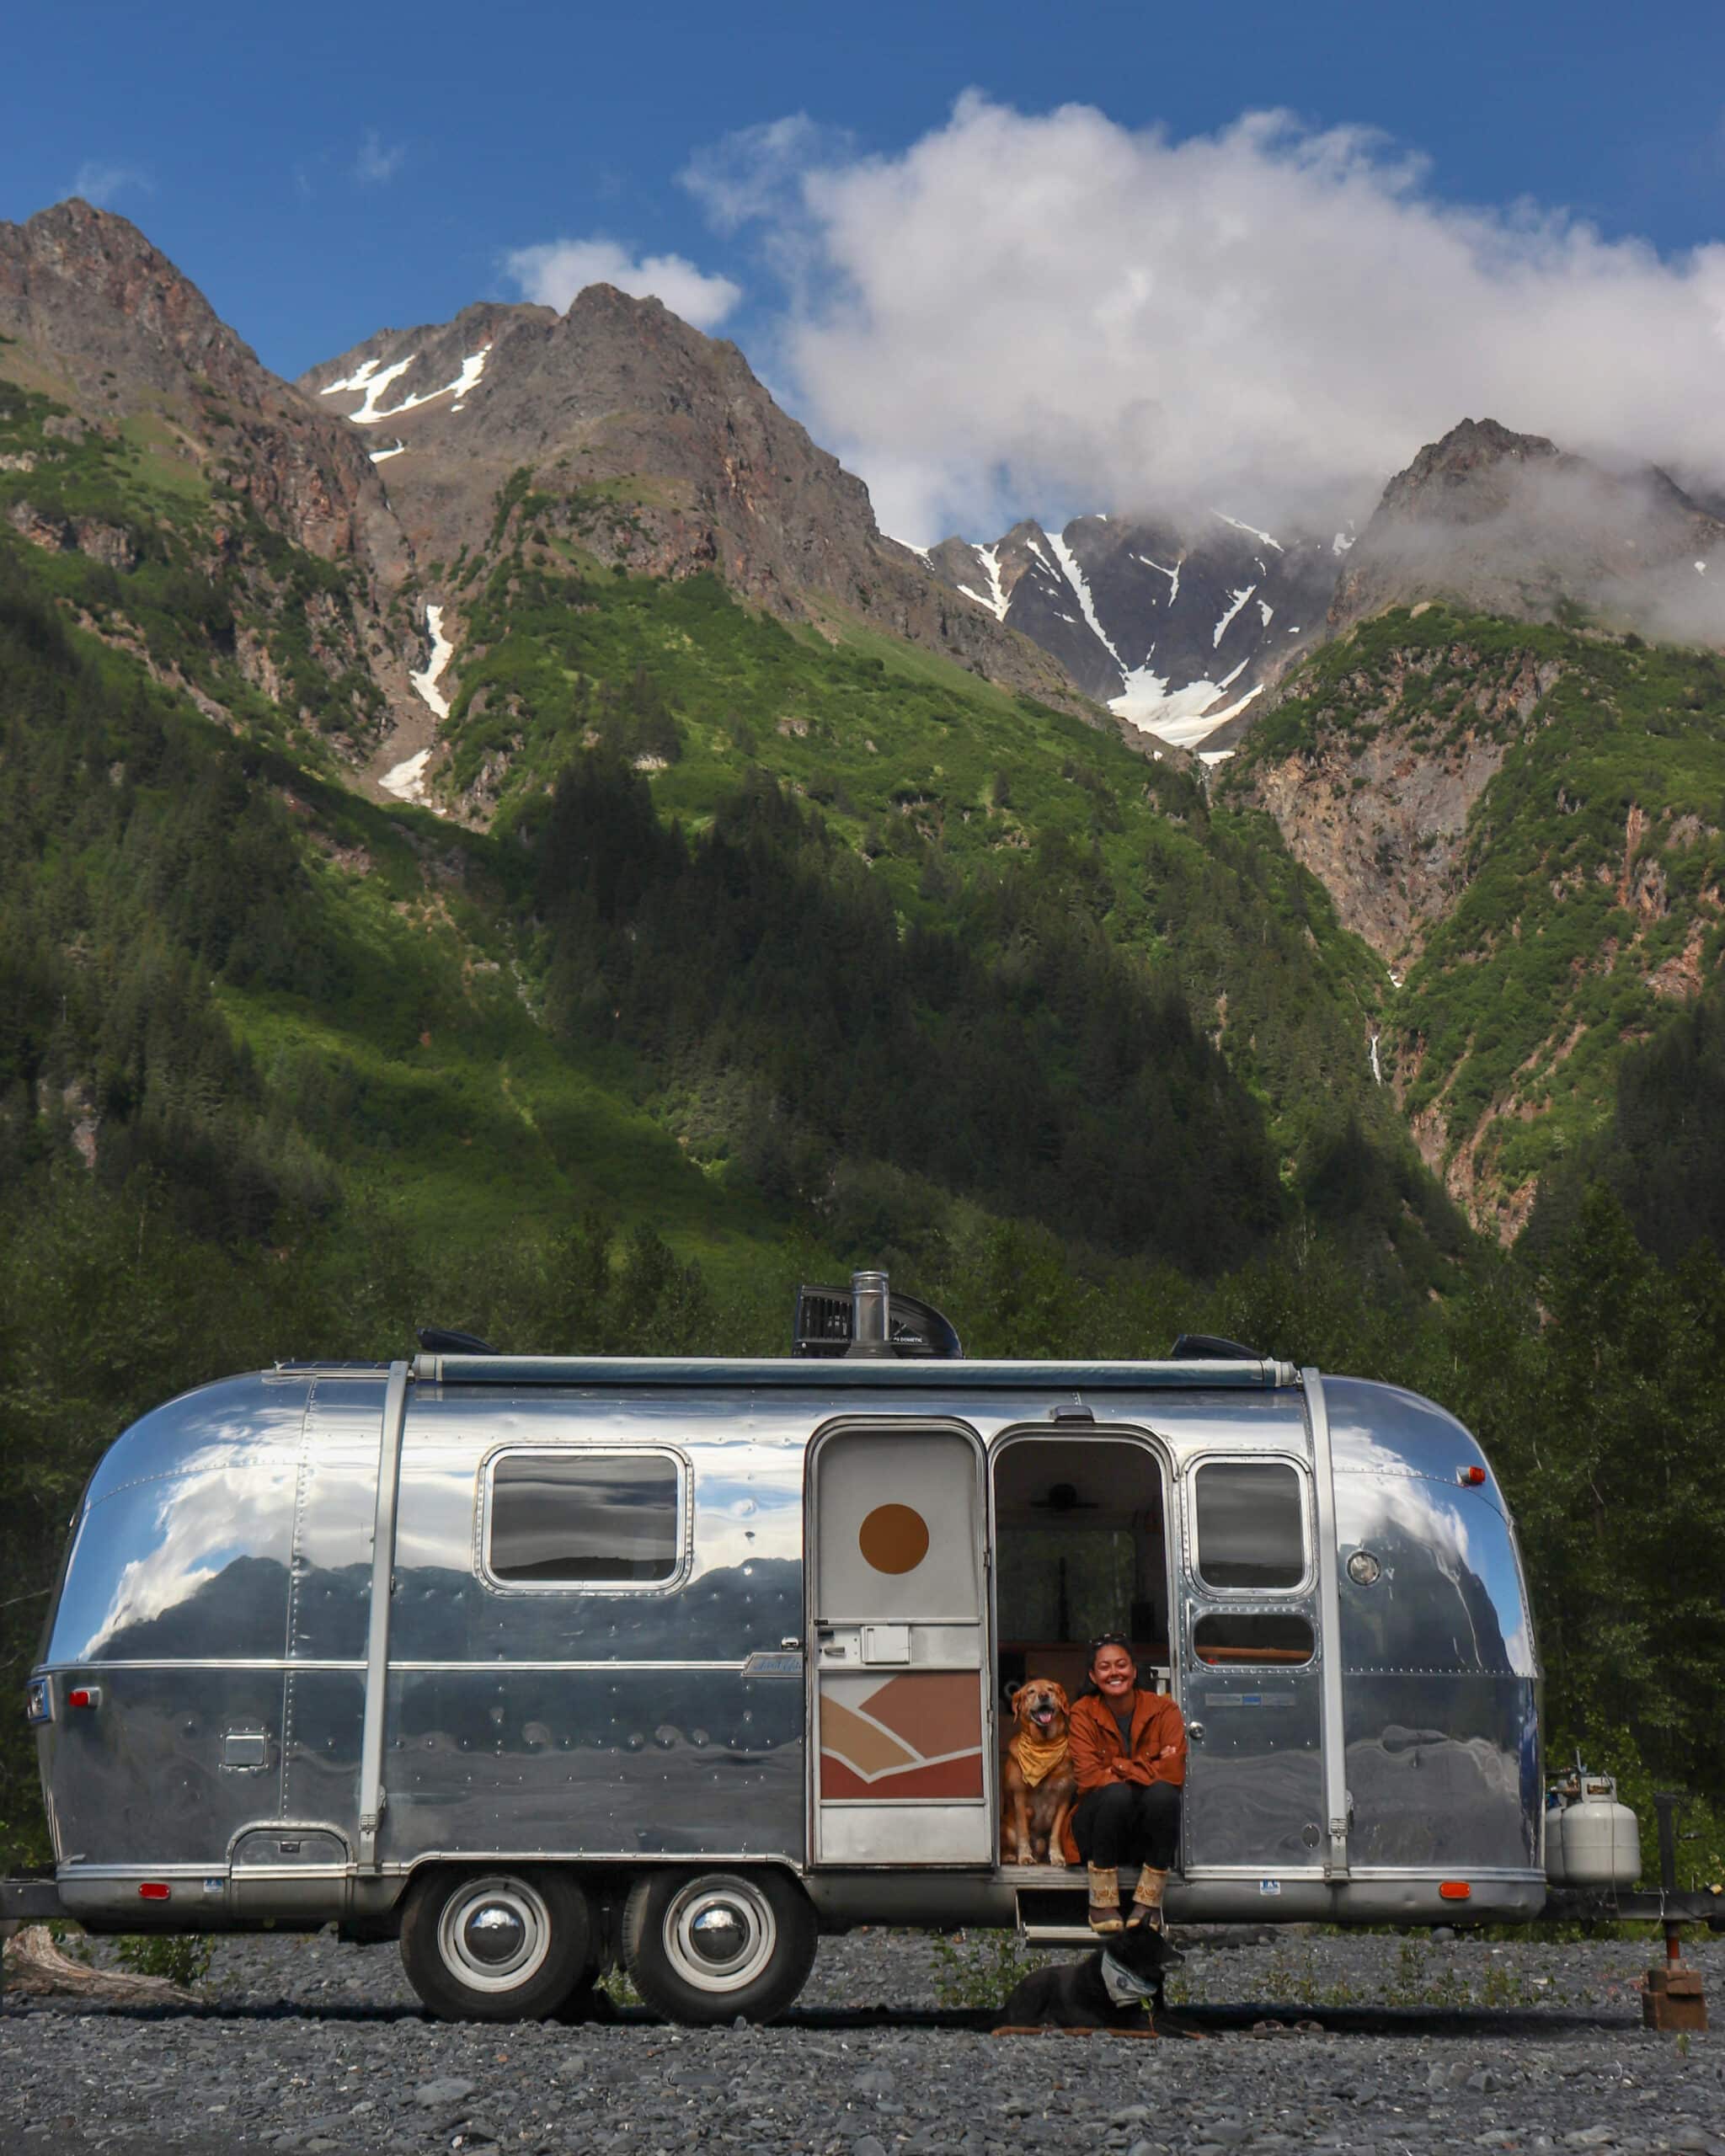 Trip and Danielle in the Airstream in Front of Tall Mountains in Alaska